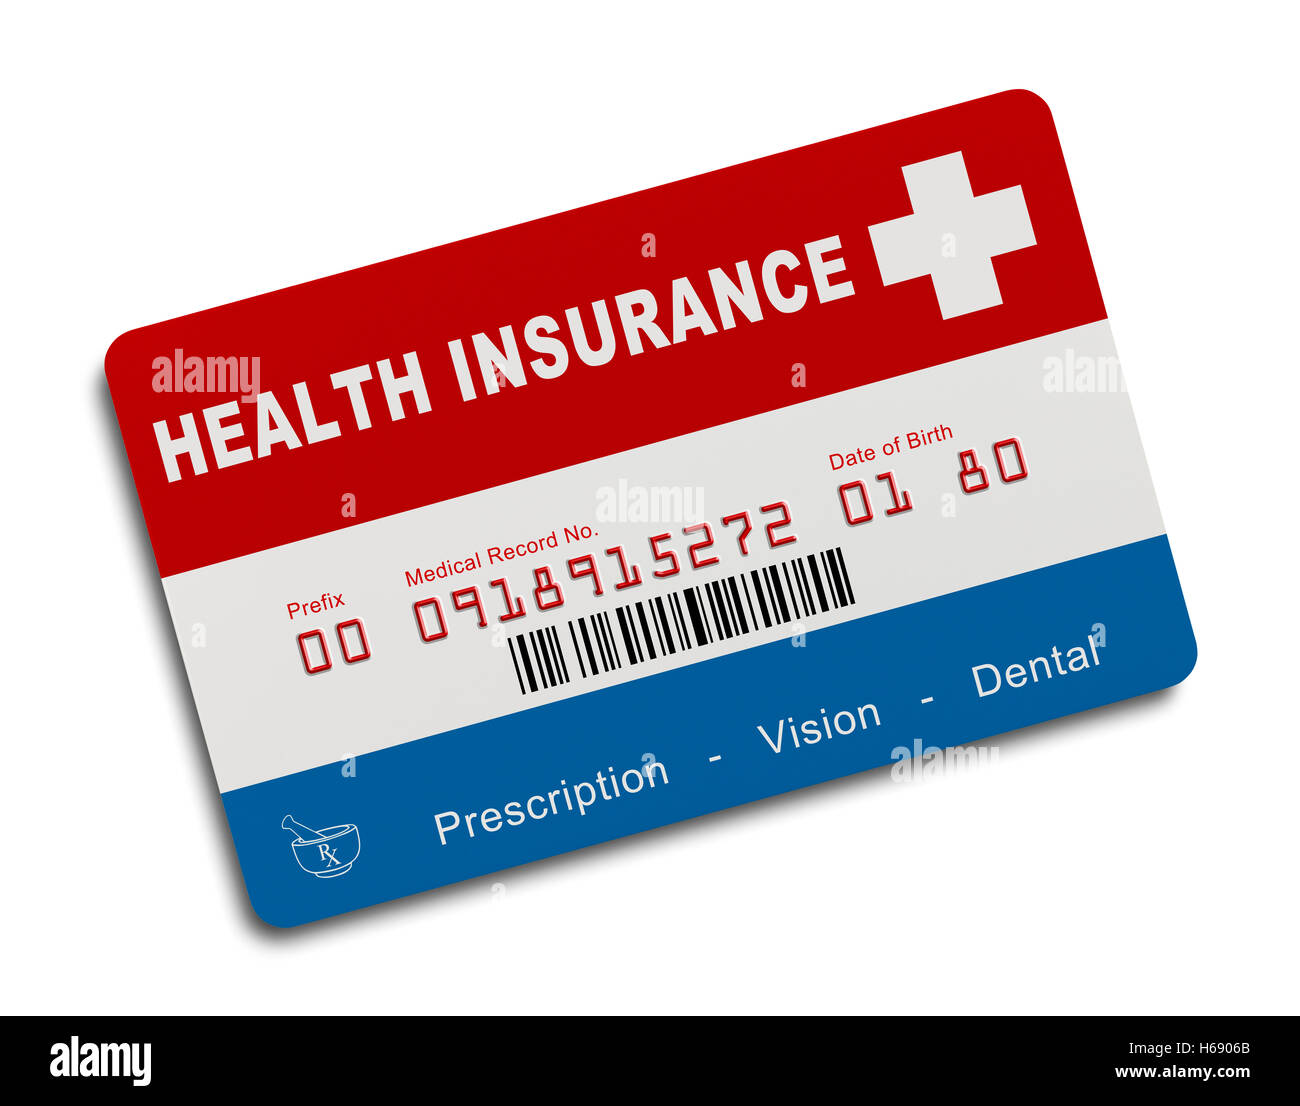 American Health Insurance Card Isolated on White Background. Stock Photo